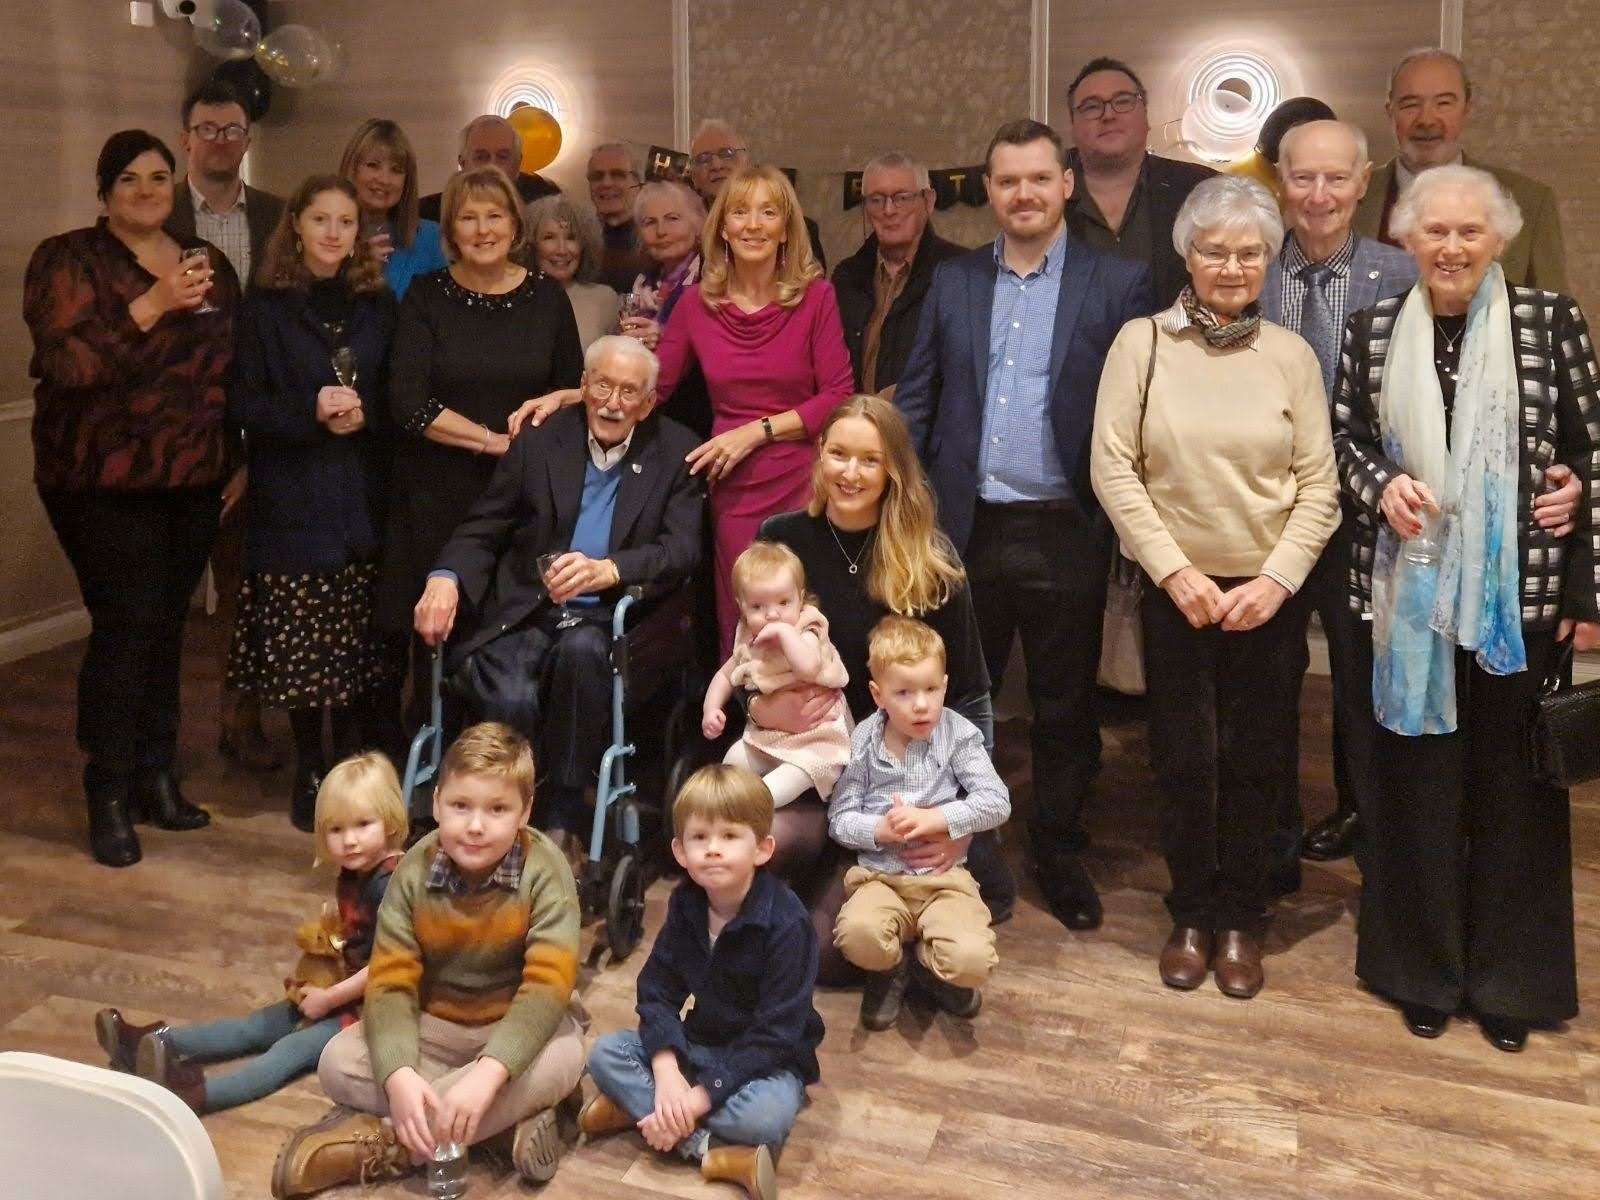 John Stokes surrounded by family members for his 100th birthday party at The Wisteria Hotel in Oakham